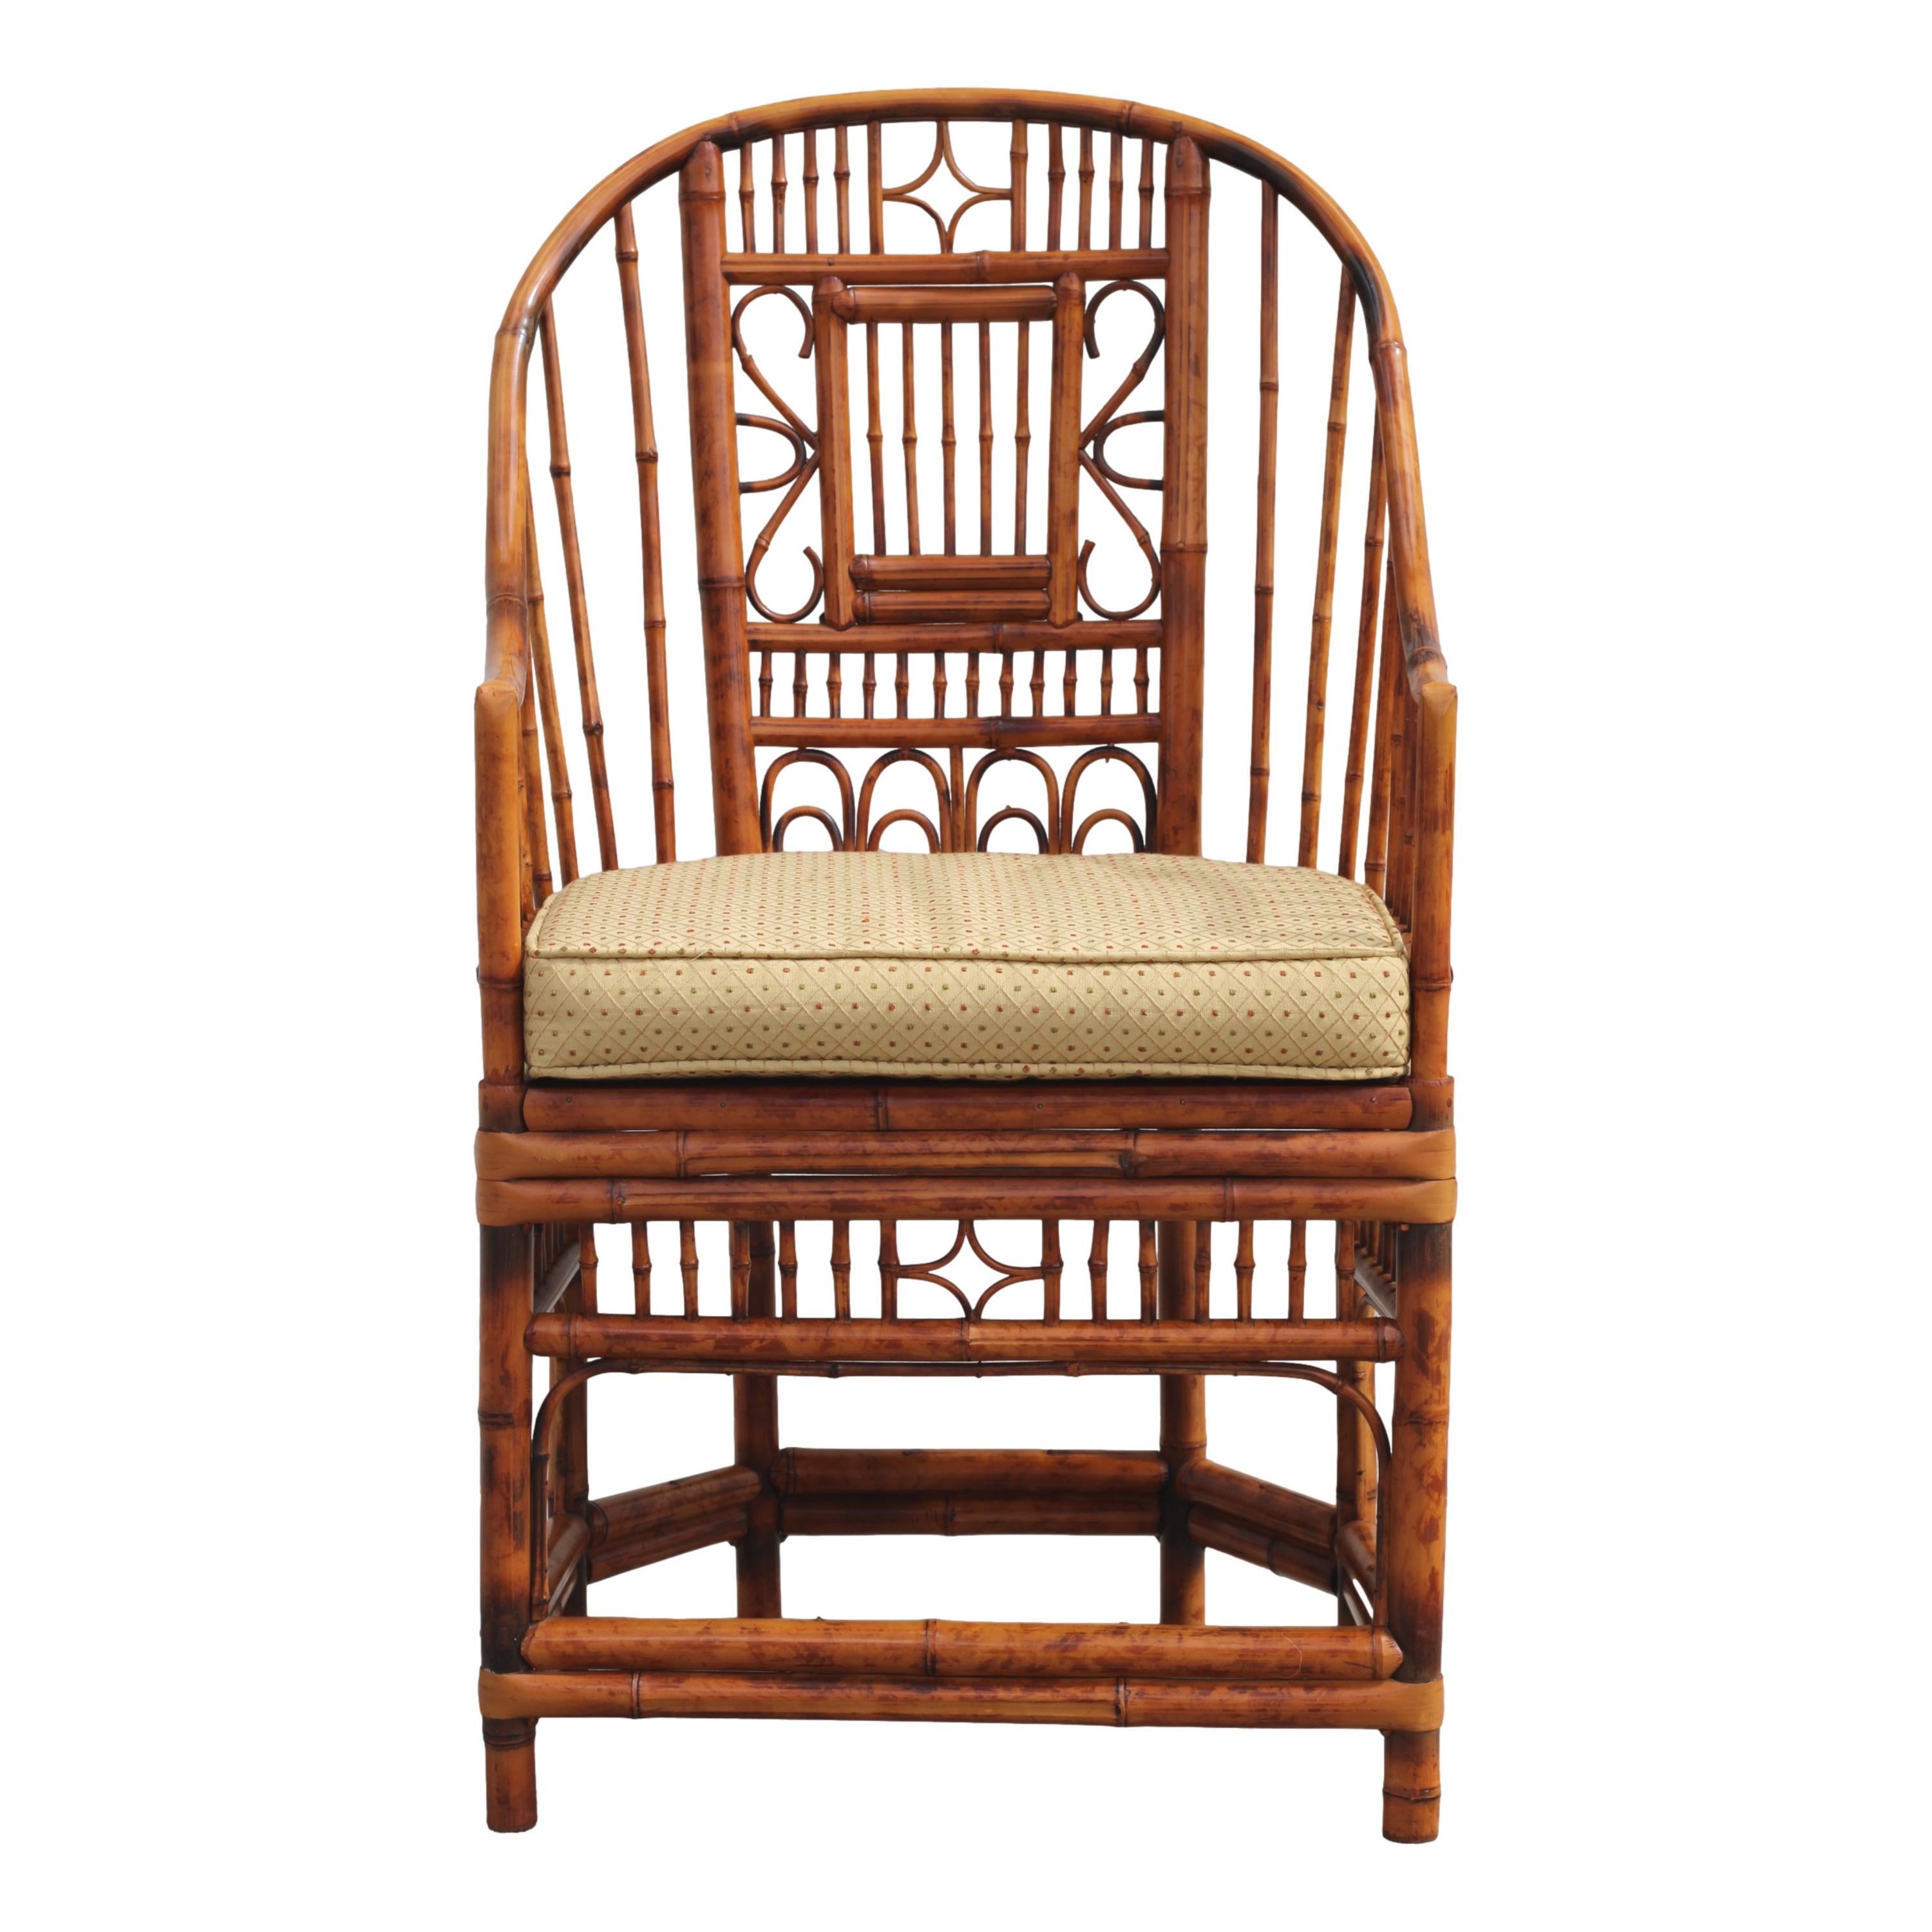 Gorgeous pair of high back burnt bamboo armchairs with gracefully shaped horseshoe frames, in the Brighton Pavilion style. These tall beautifully handcrafted Chinese Chippendale chairs feature a tortoiseshell finish, caned-bottom seats, and